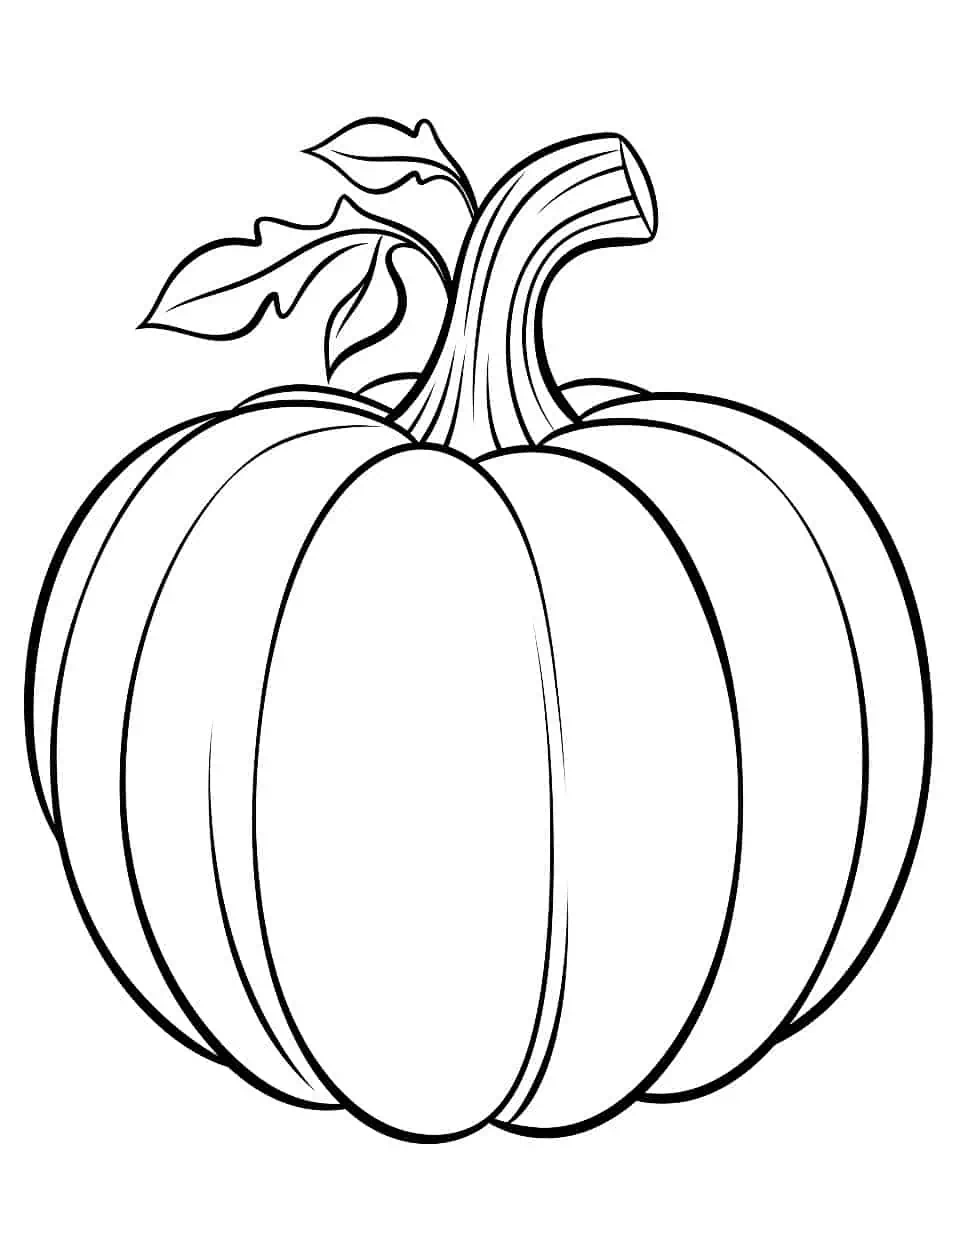 Toddler-Friendly Pumpkin Coloring Page - A large, easy-to-color pumpkin with simple features, suitable for toddlers.